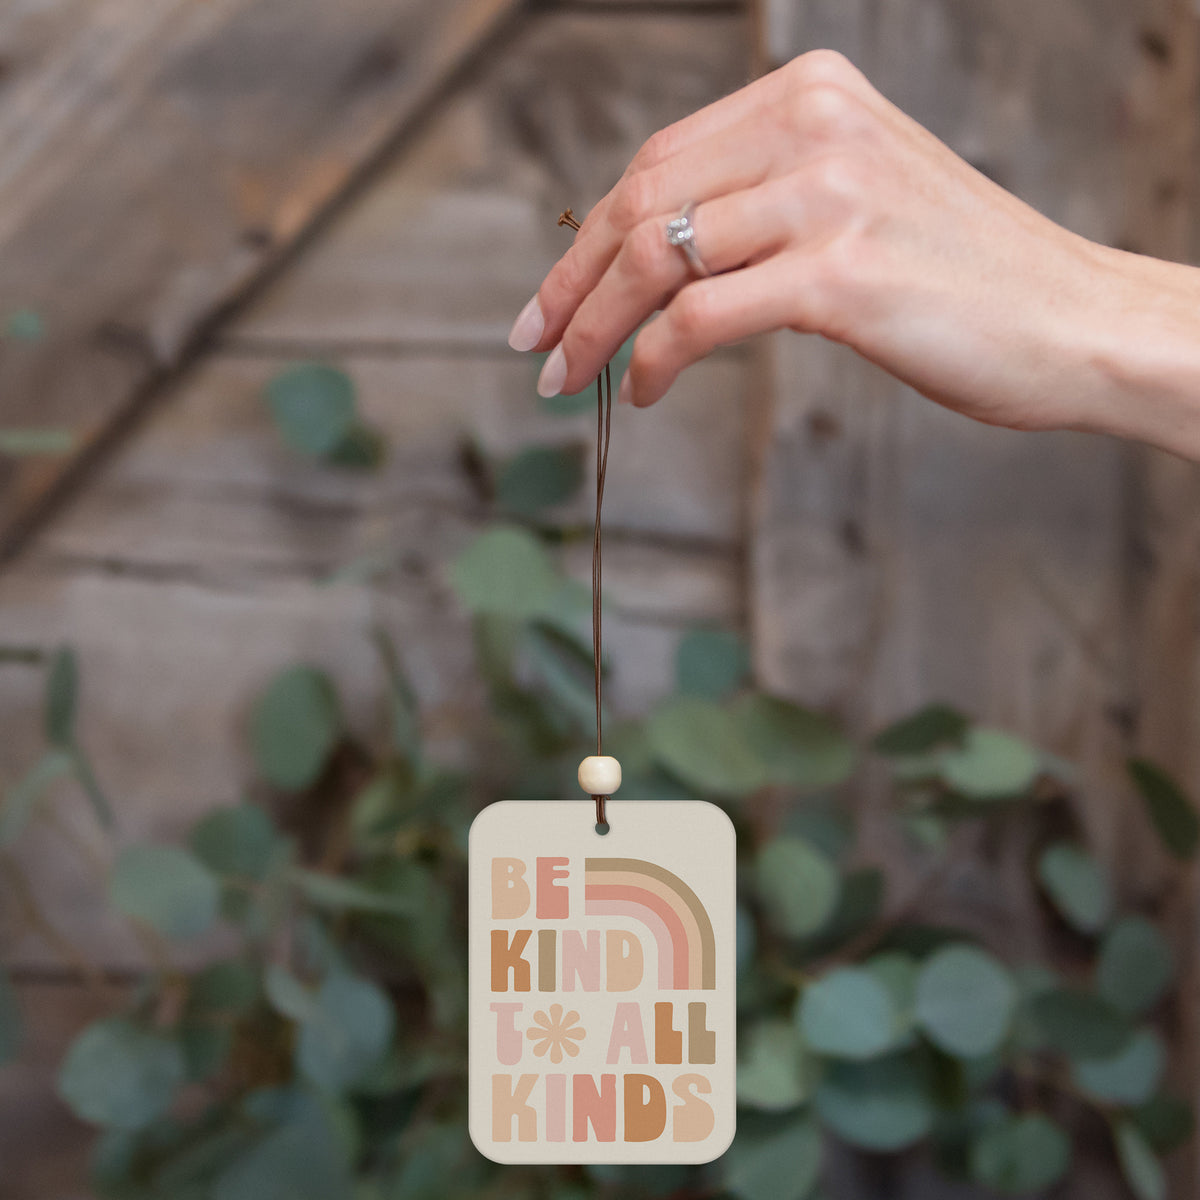 Be Kind to All Kinds Car Air Freshener